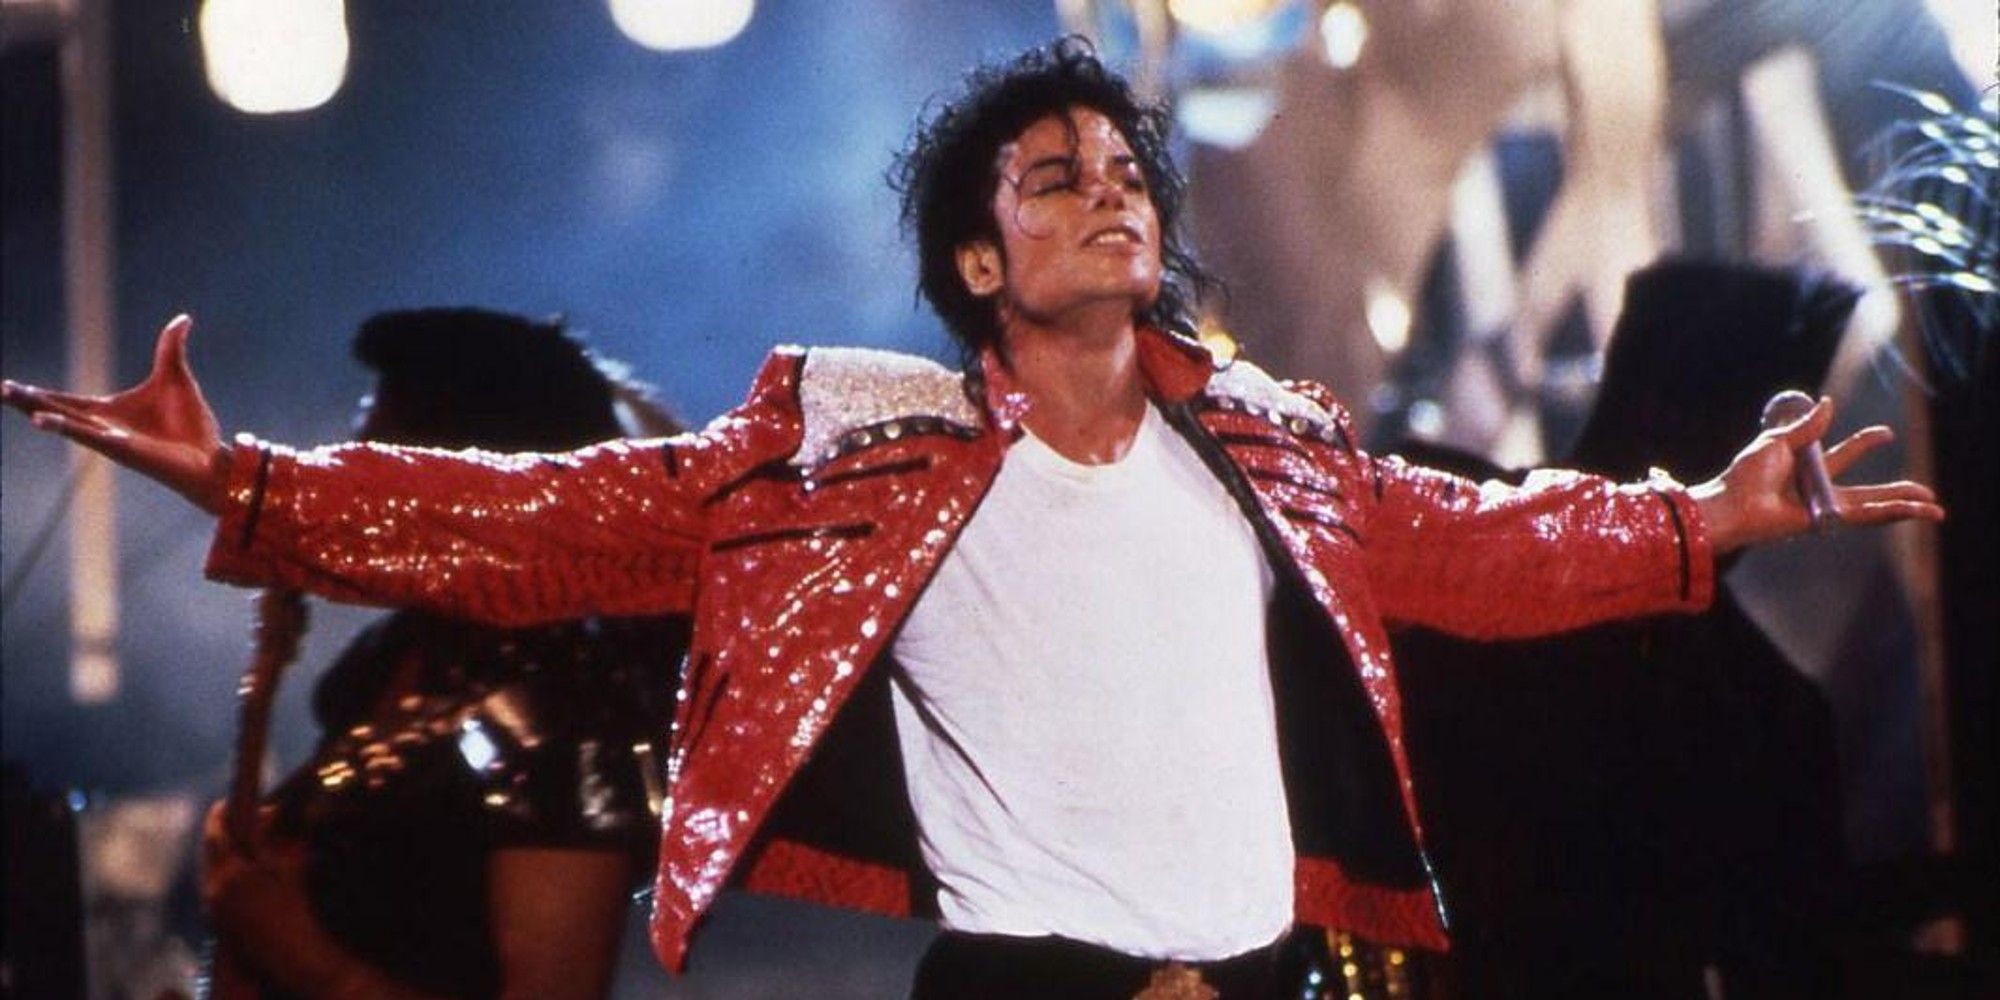 Michael Jackson plays “Beat It” with his arms spread wide.